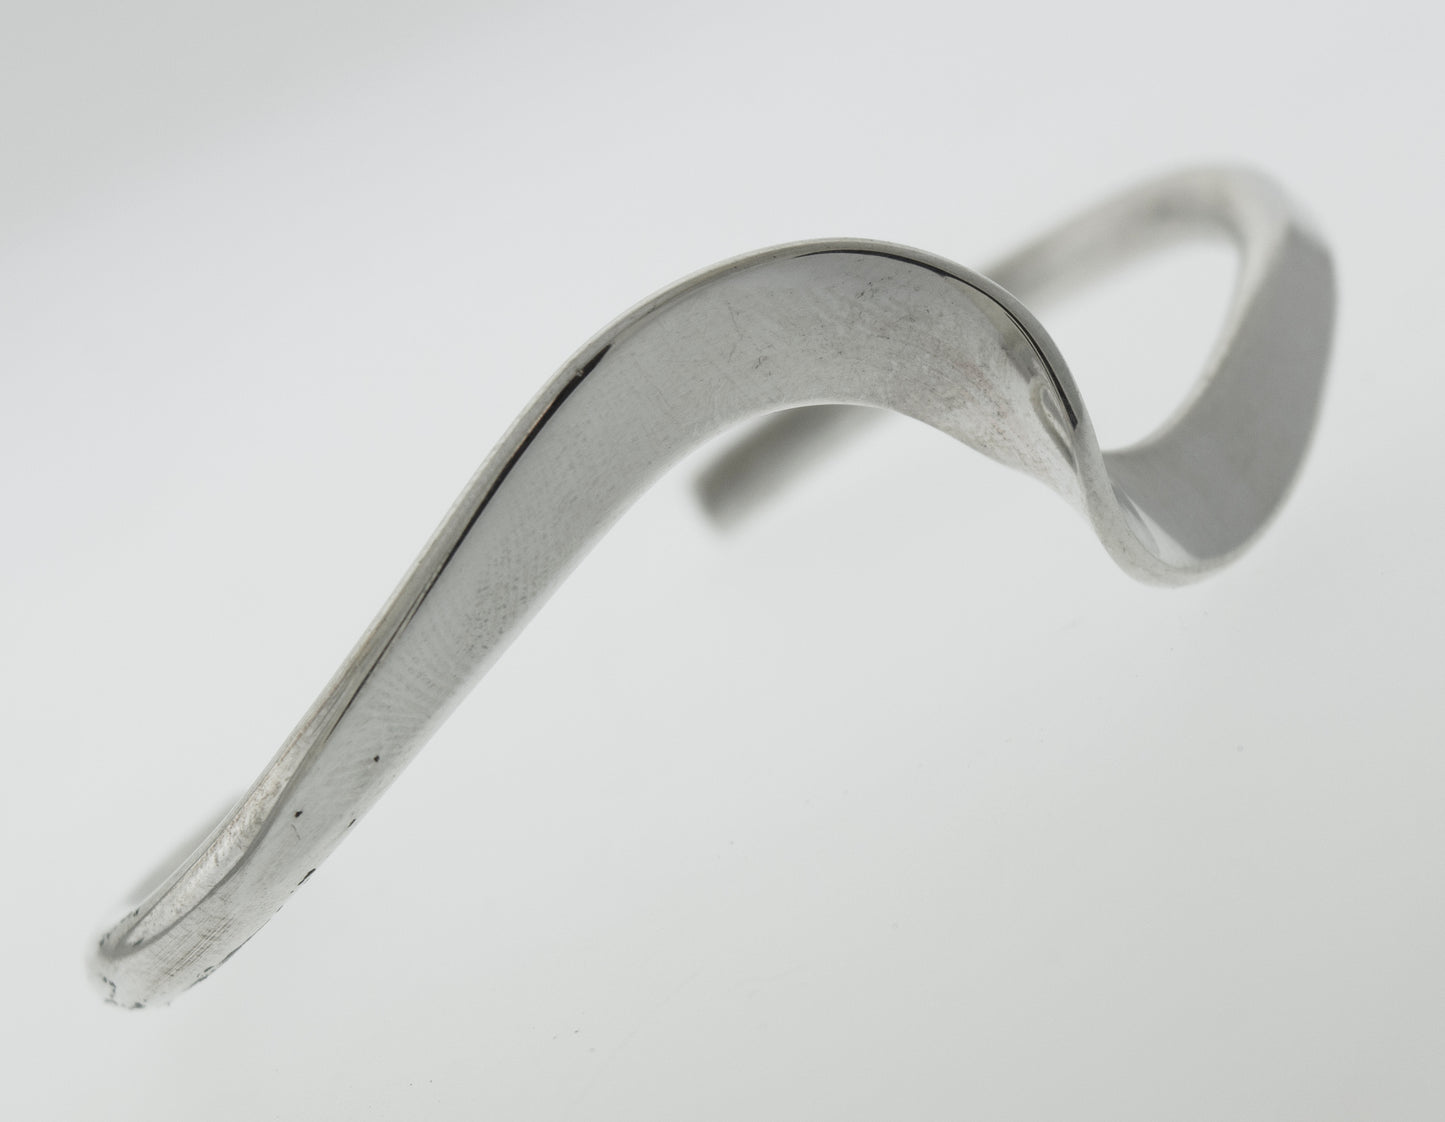 A simple Super Silver Native American Handmade Thick Silver Wave Cuff bracelet with a curved shape.